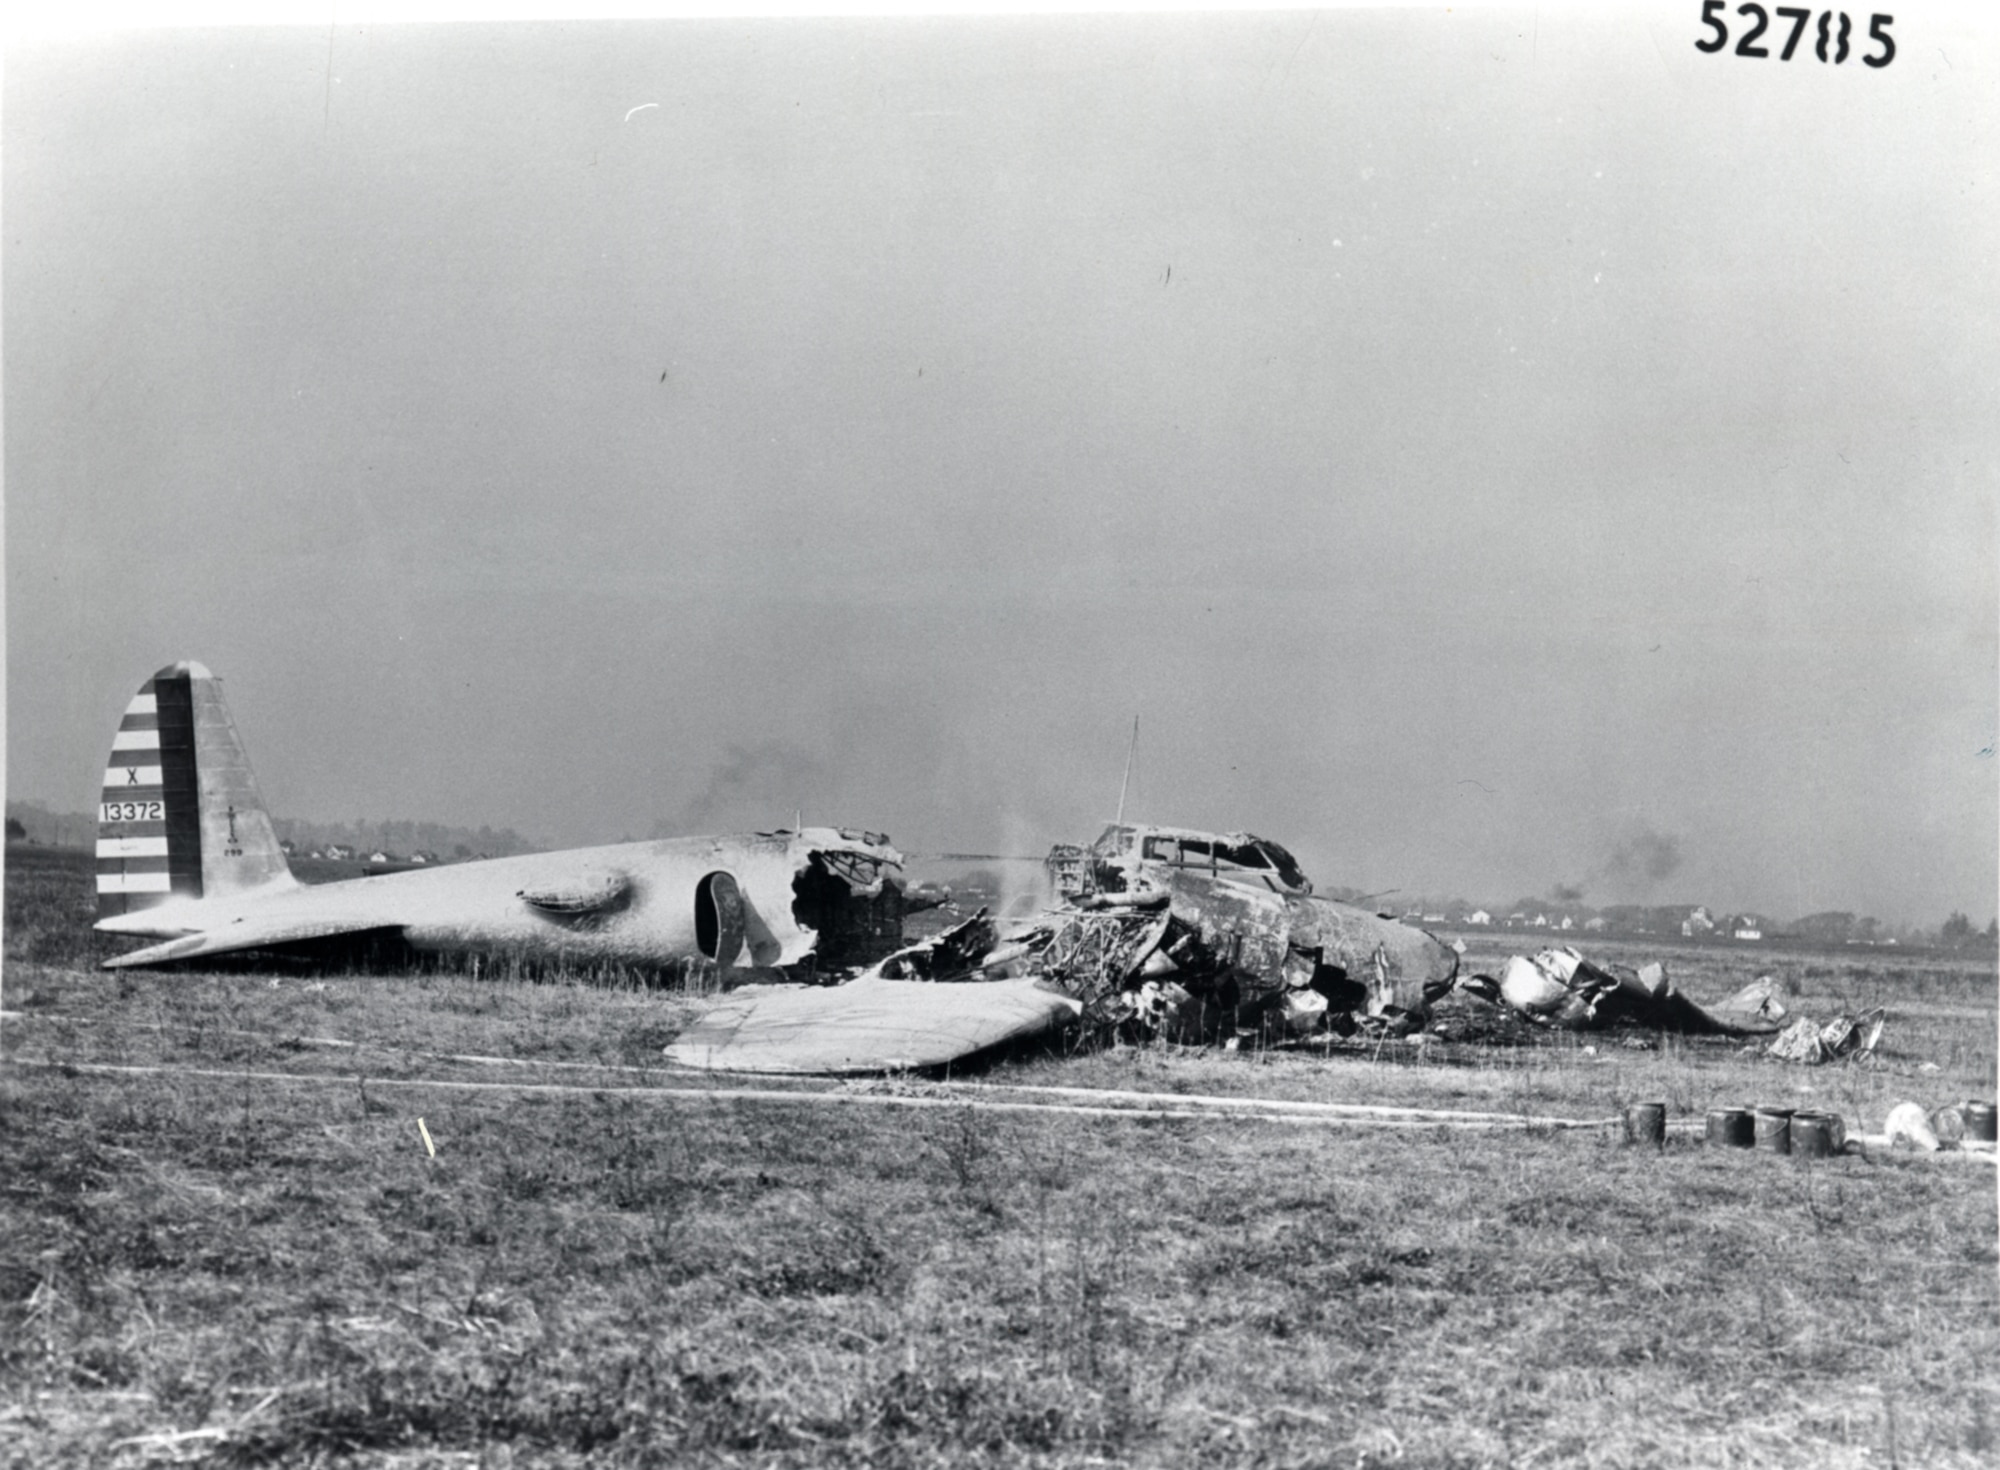 Remains of the XB-17 (Model 299) following its crash due to an attempted takeoff with locked elevator controls. (U.S. Air Force photo)